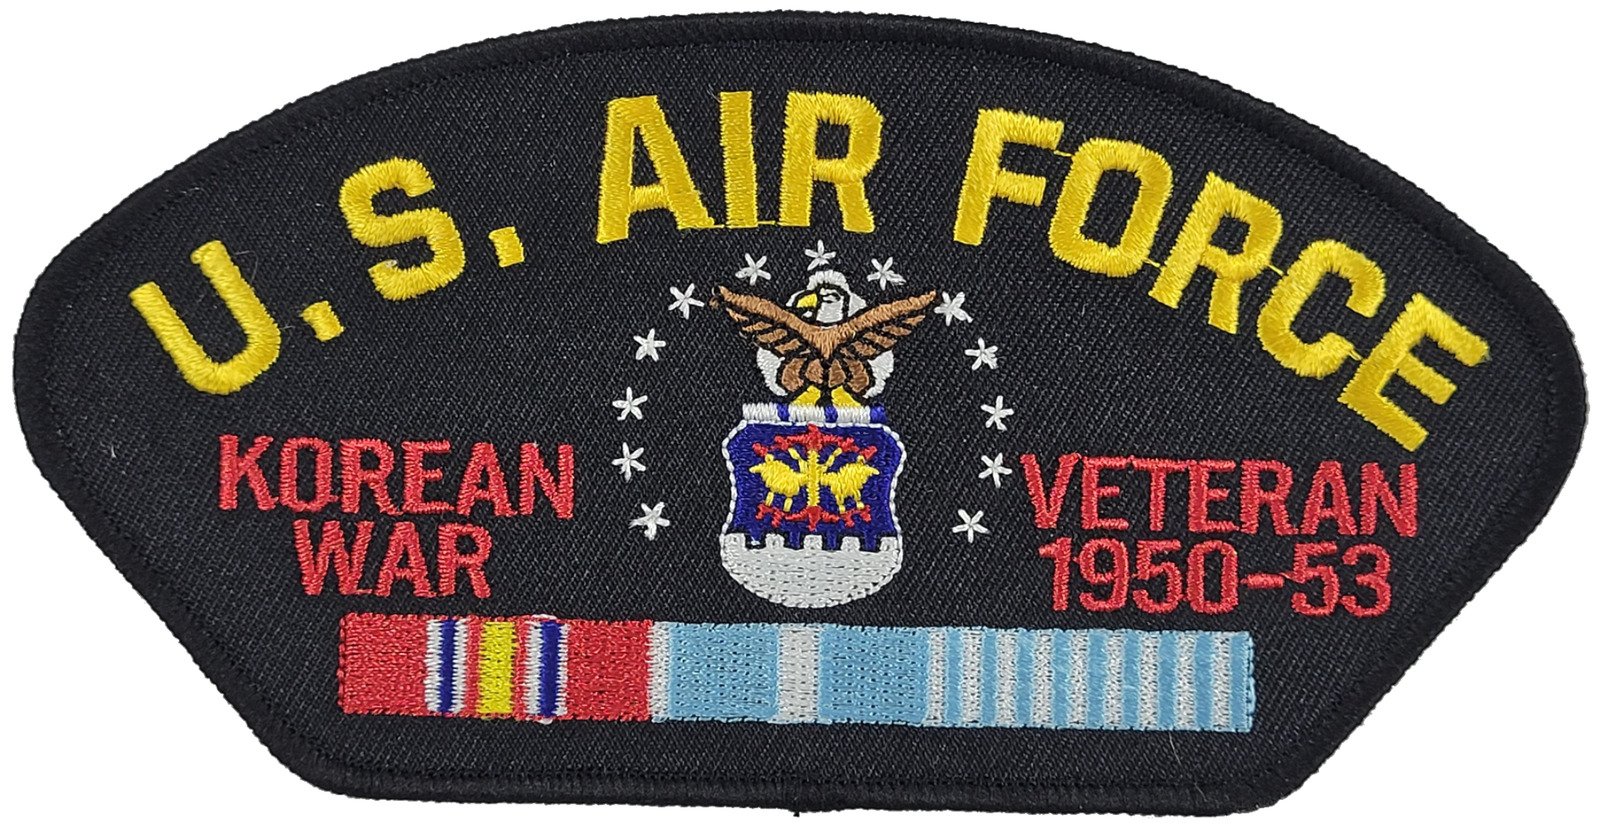 U S AIR FORCE KOREAN WAR VETERAN 1950-53 with SHIELD and SERVICE RIBBONS PATCH